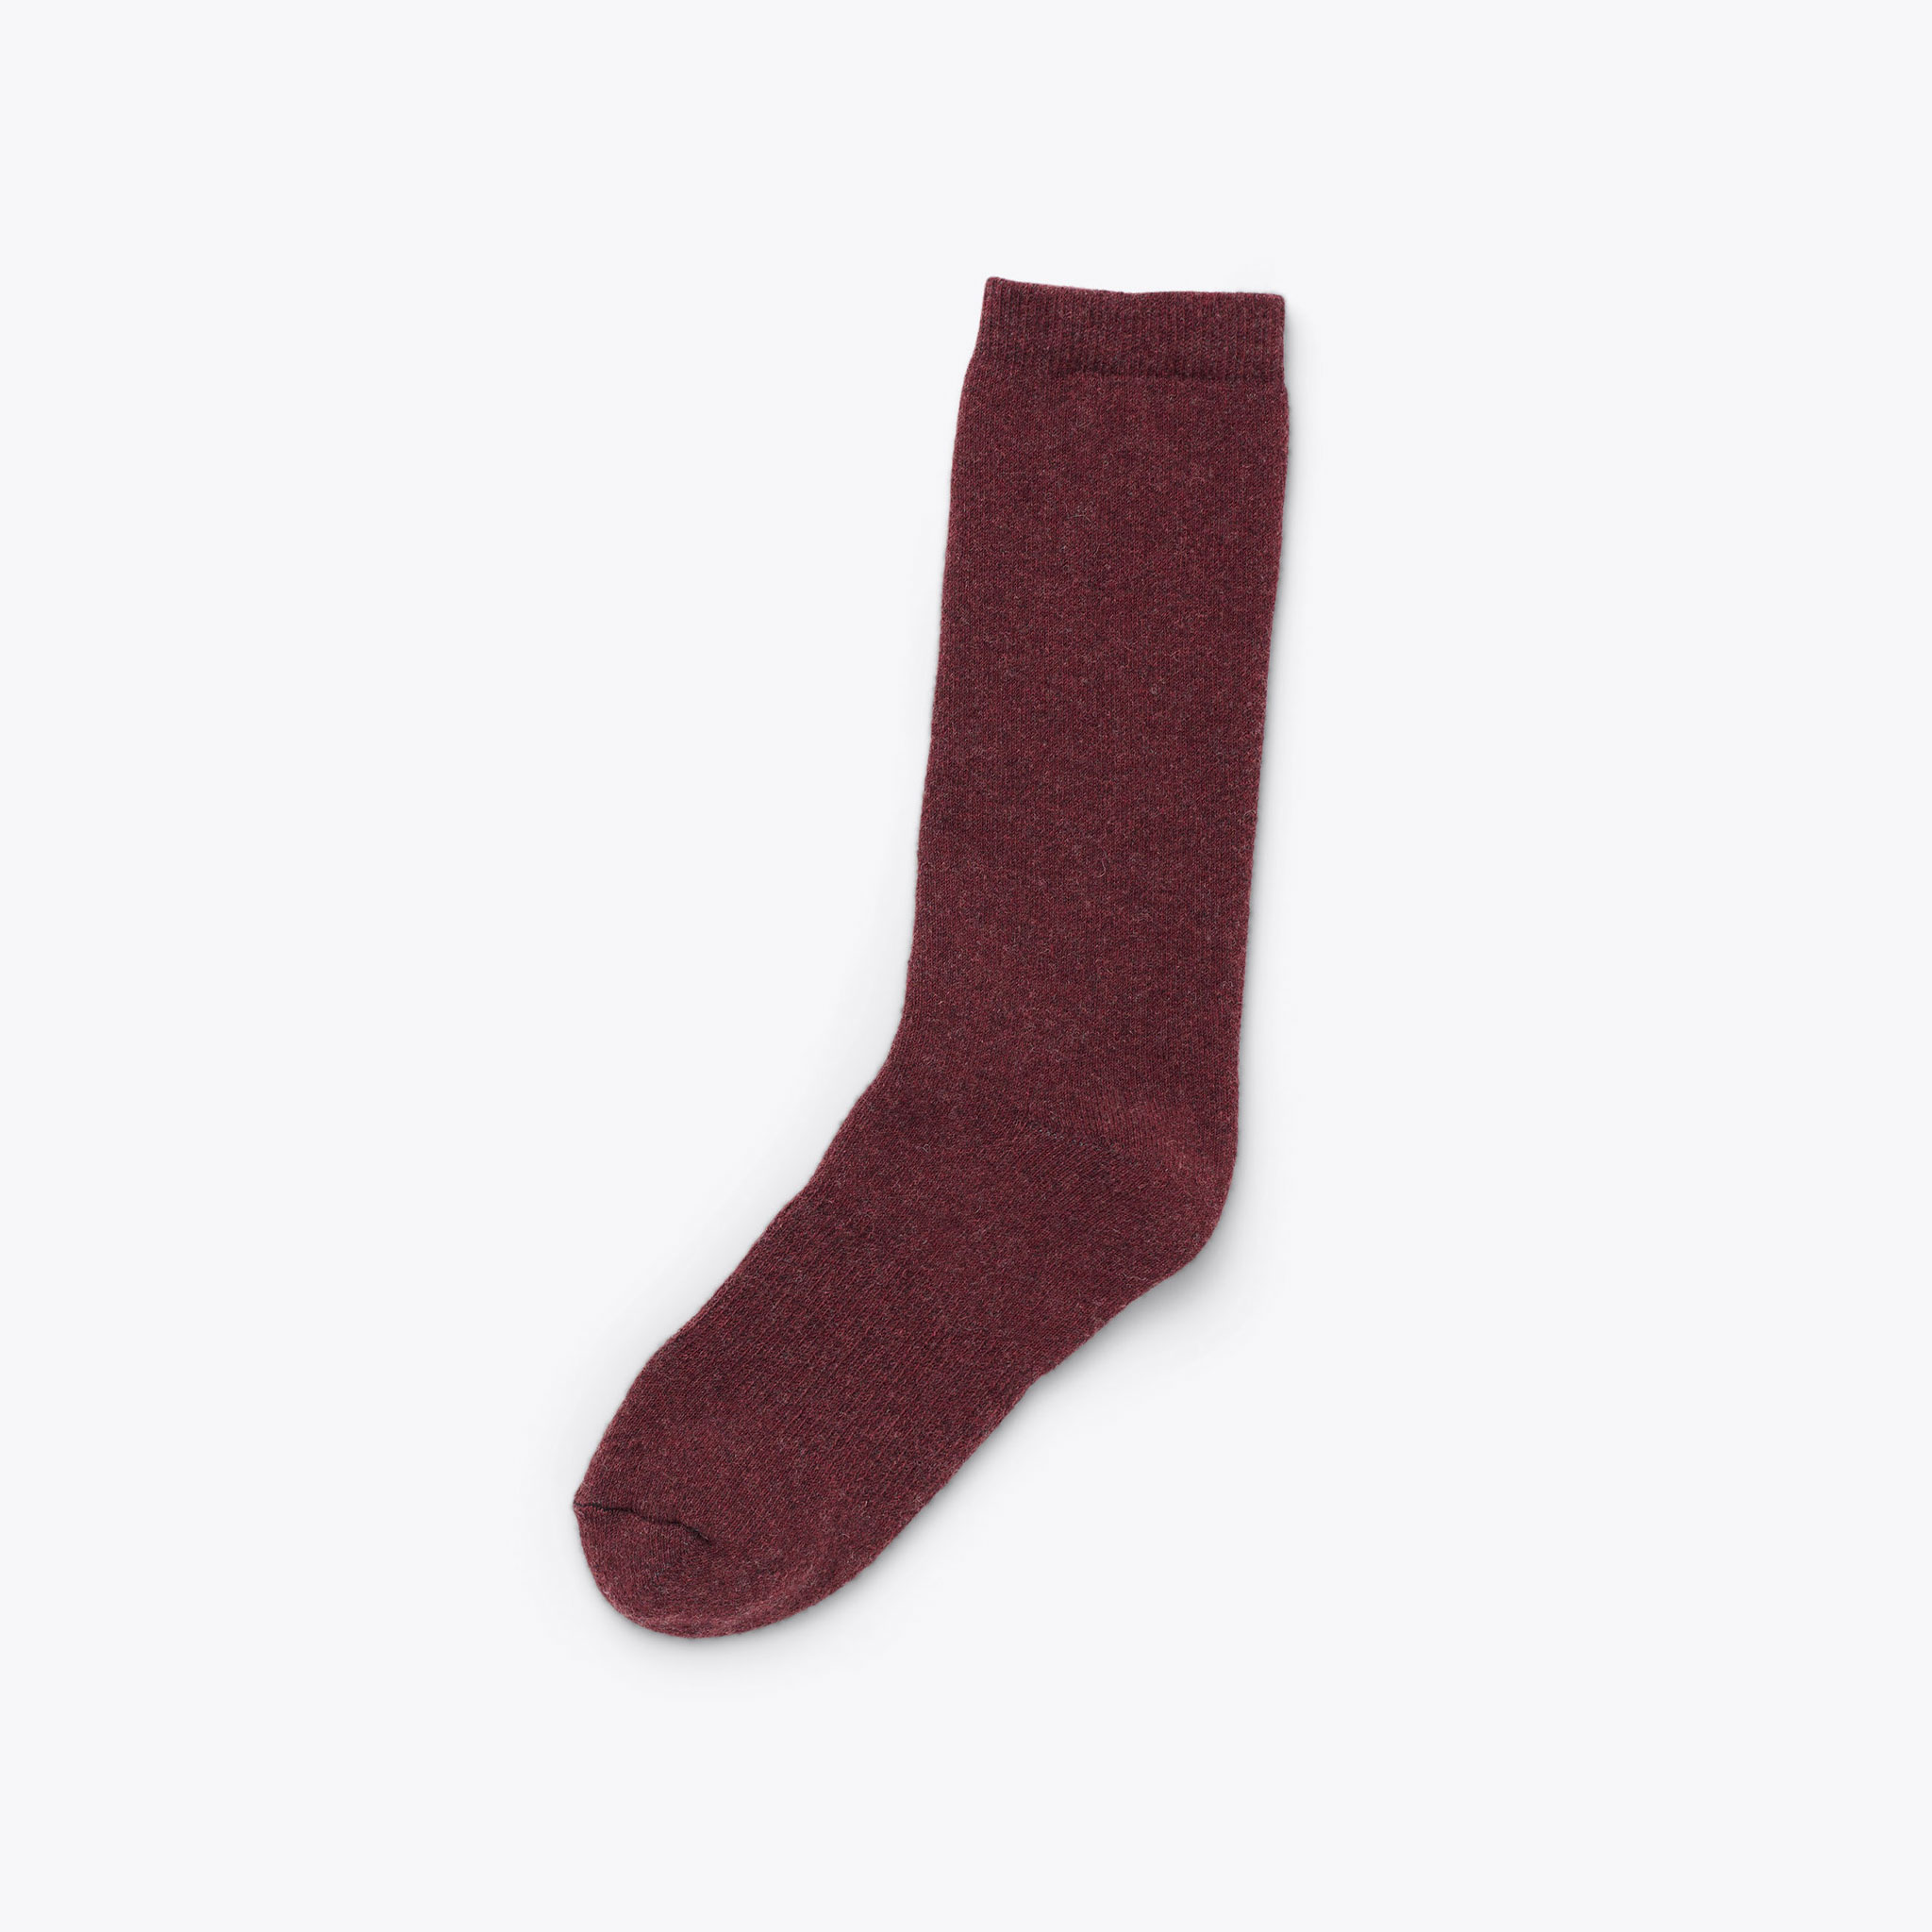 Nisolo Wool Cushion Crew Hiker Sock Burgundy - Every Nisolo product is built on the foundation of comfort, function, and design. 